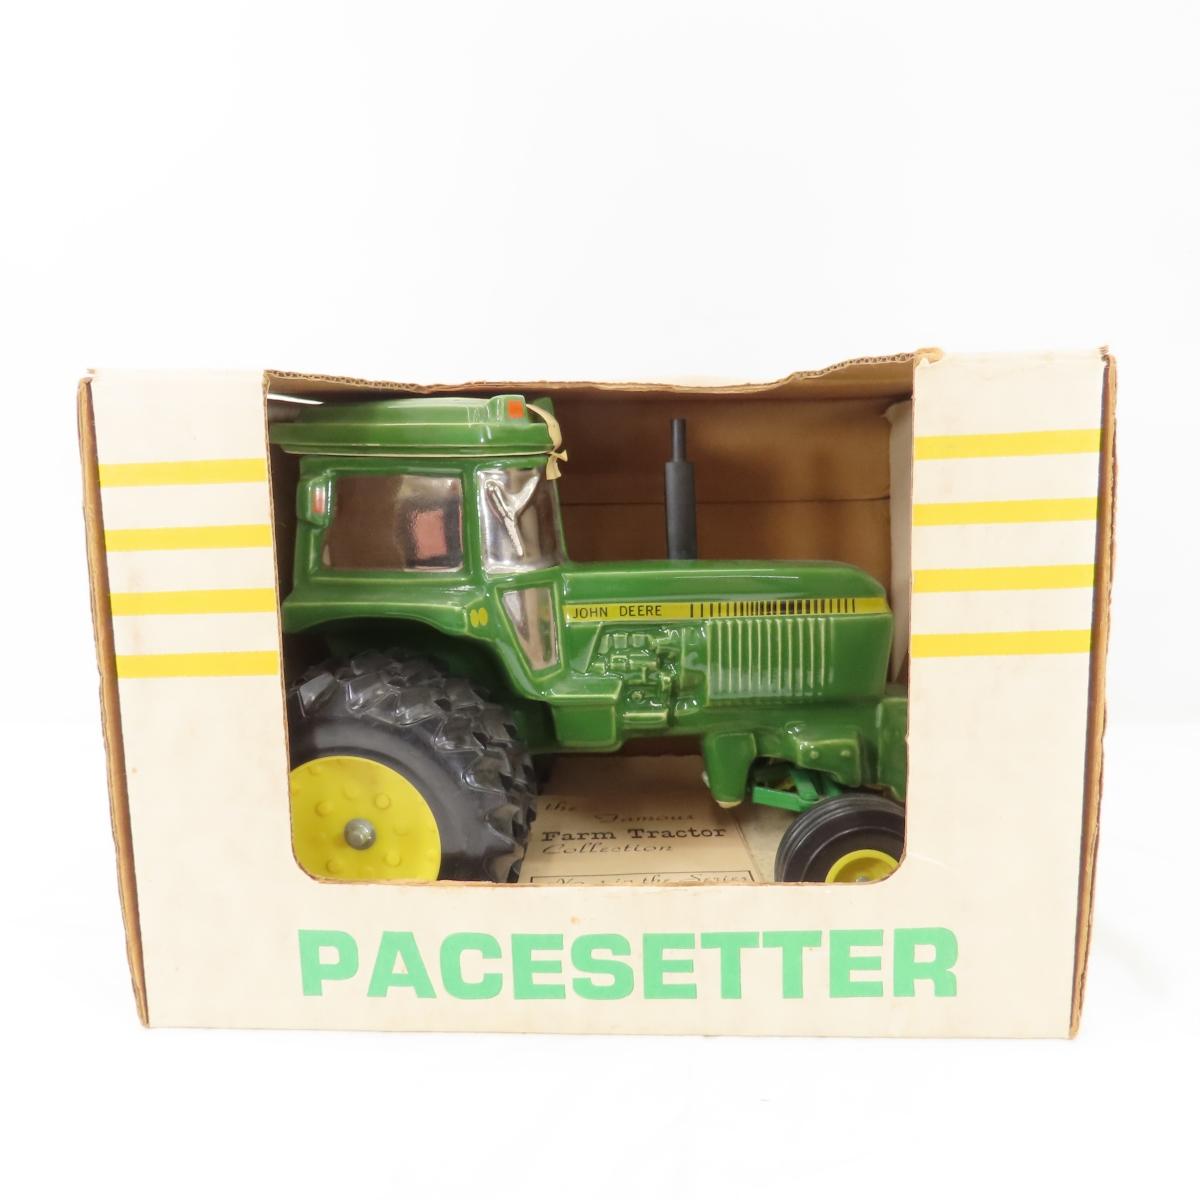 1983 Pacesetter Vodka Tractor Decanters #1, 2 & 3